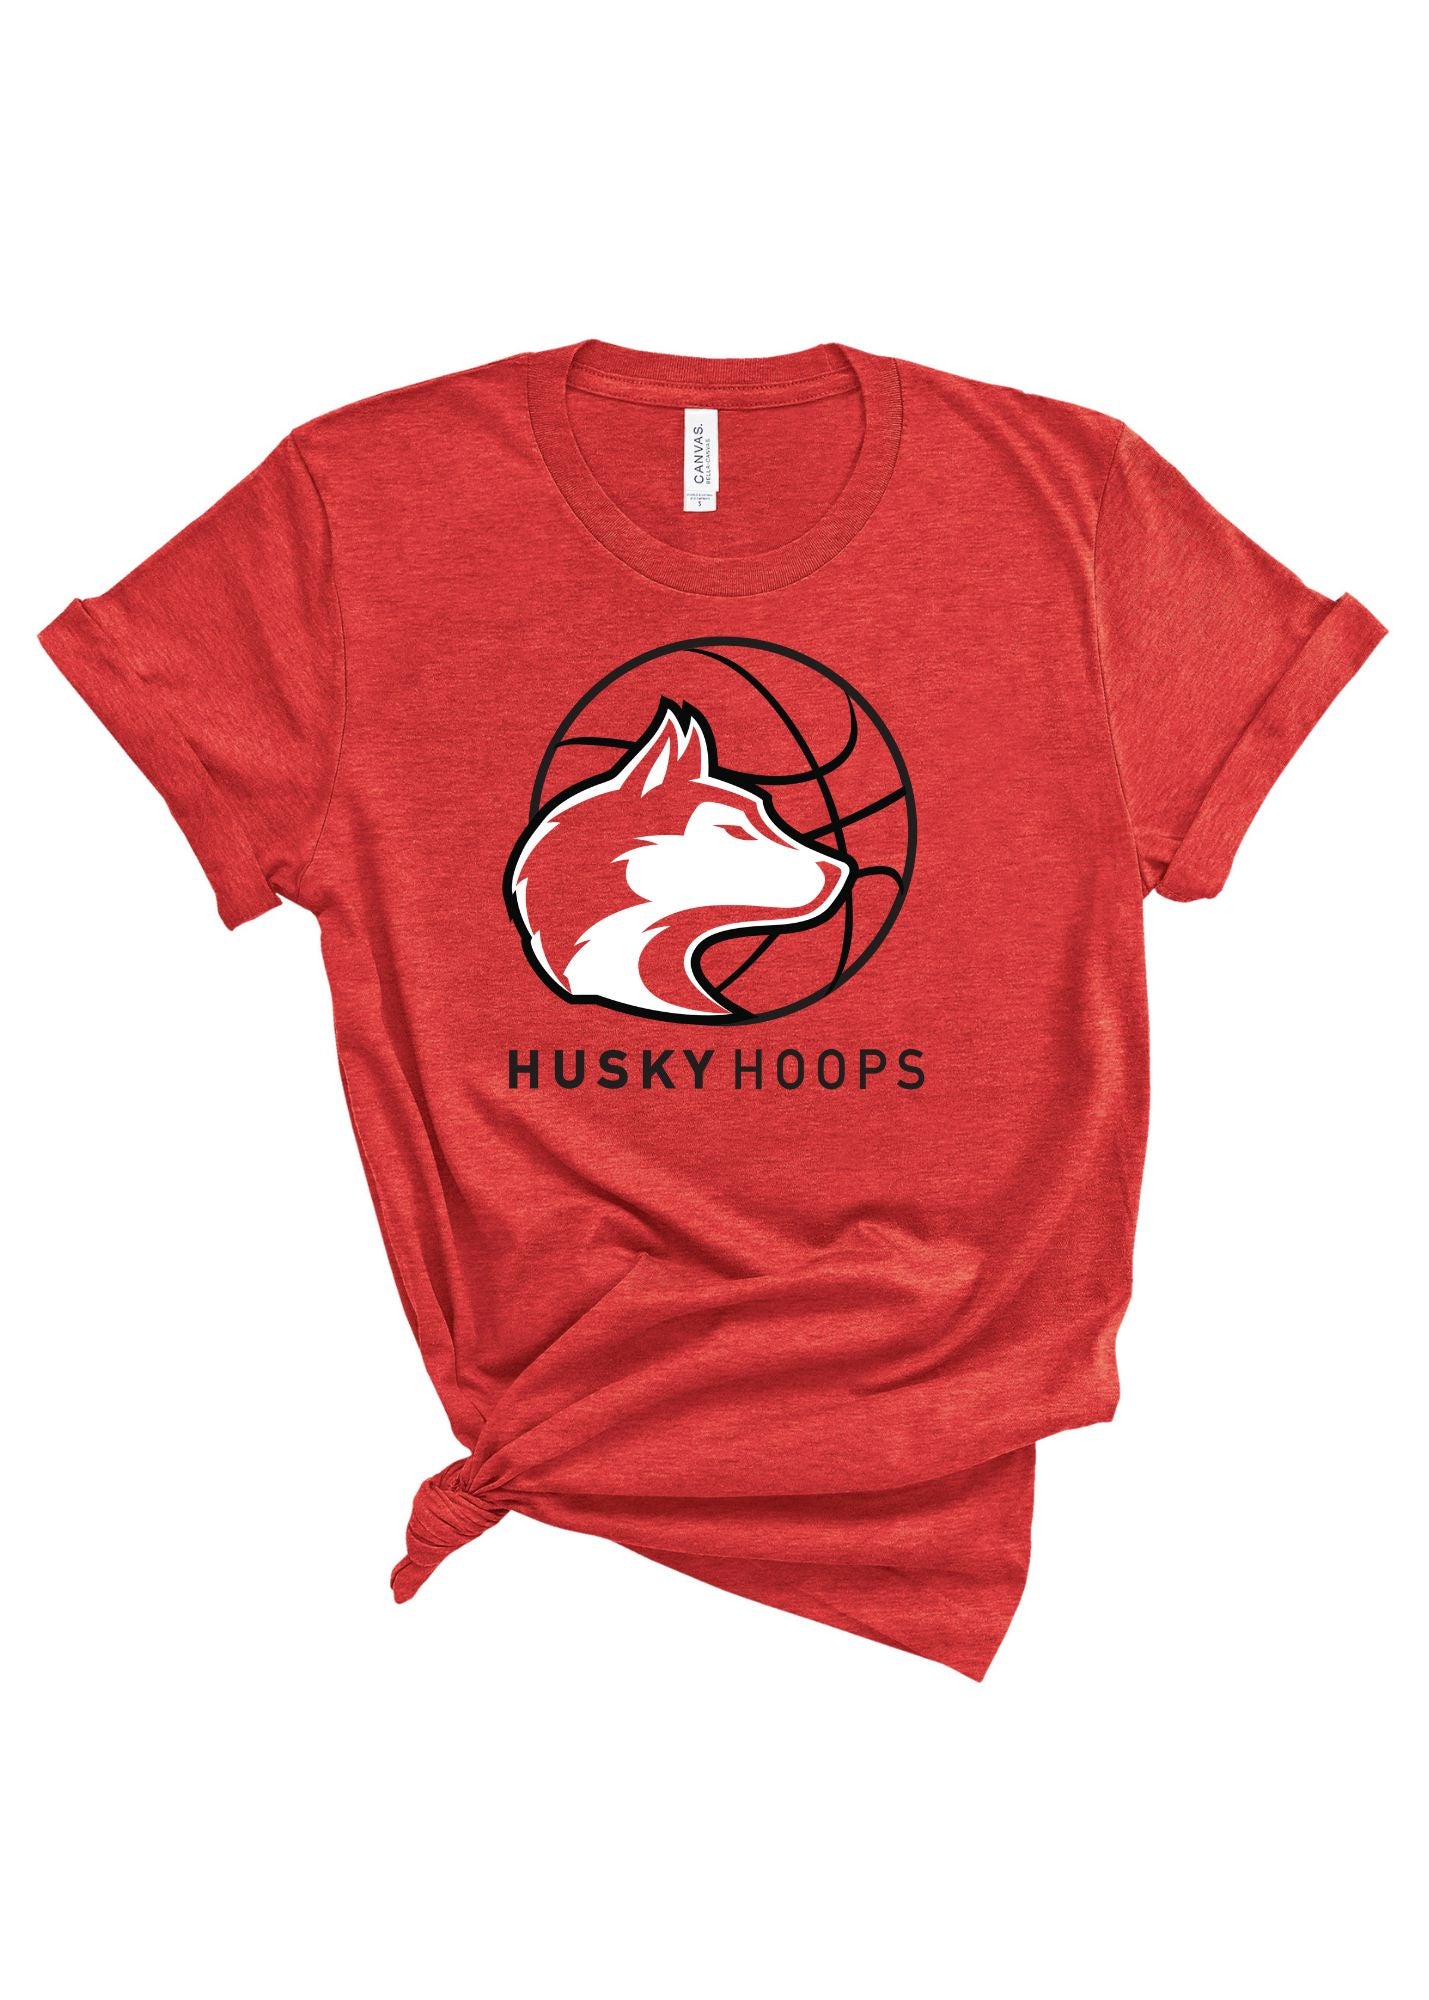 Husky Hoops | Tee | Adult-Sister Shirts-Sister Shirts, Cute & Custom Tees for Mama & Littles in Trussville, Alabama.